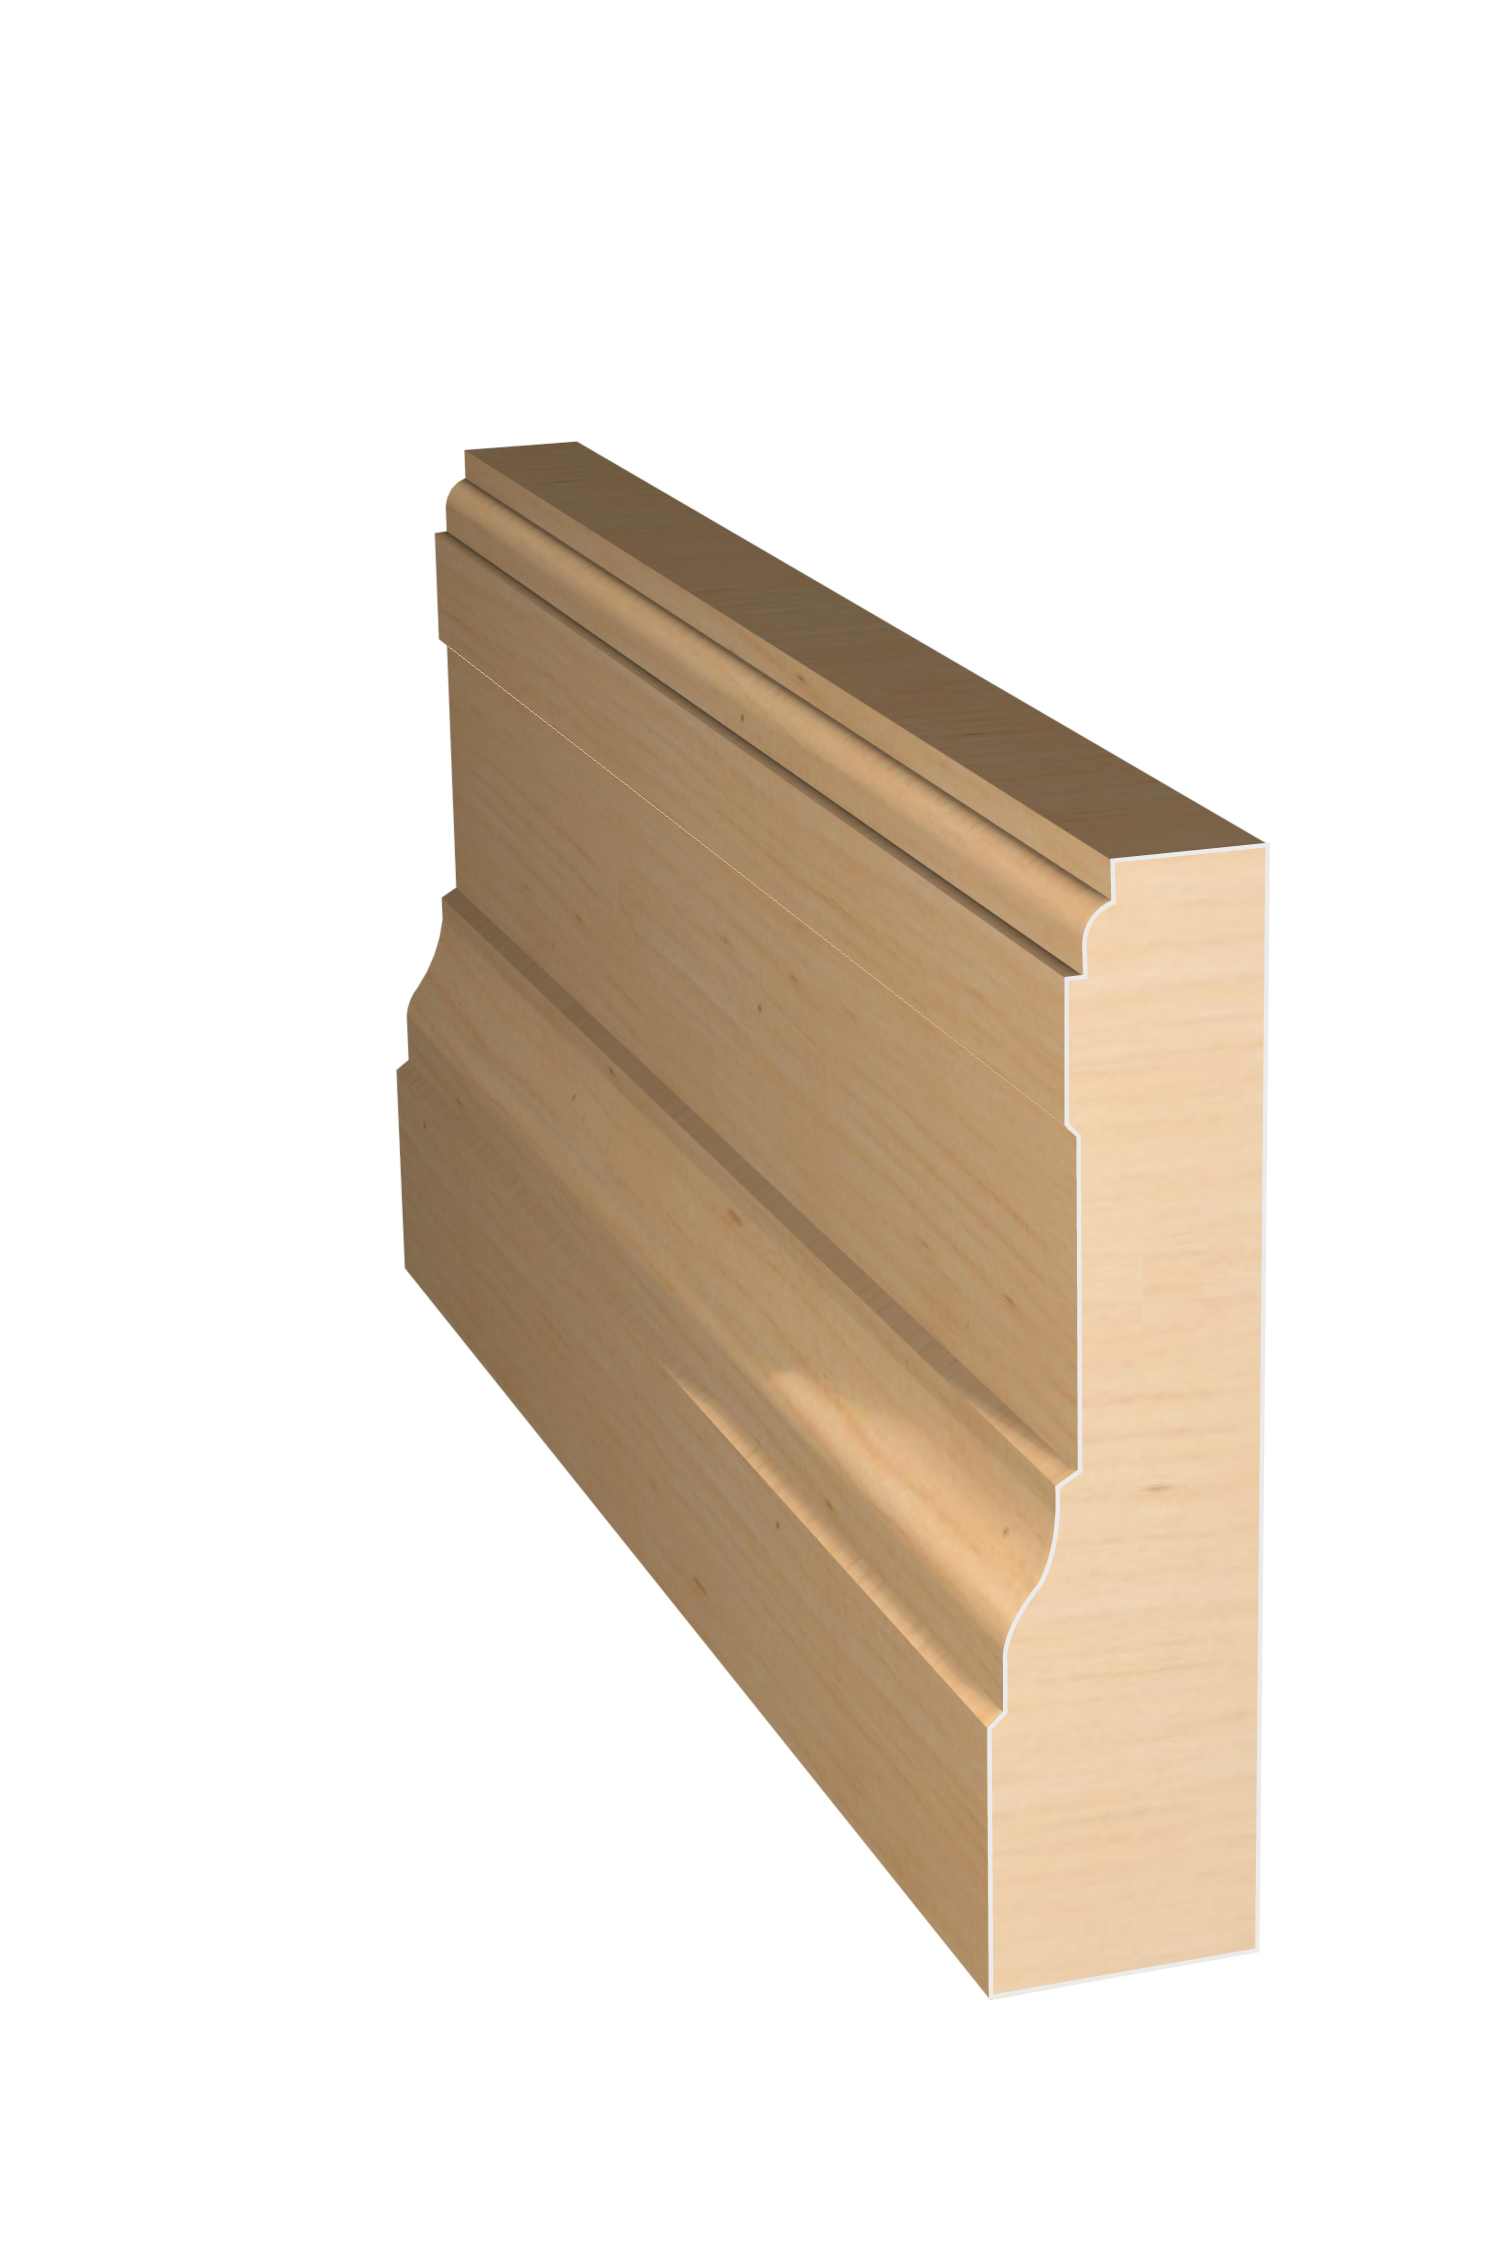 Three dimensional rendering of custom casing wood molding CAPL313 made by Public Lumber Company in Detroit.